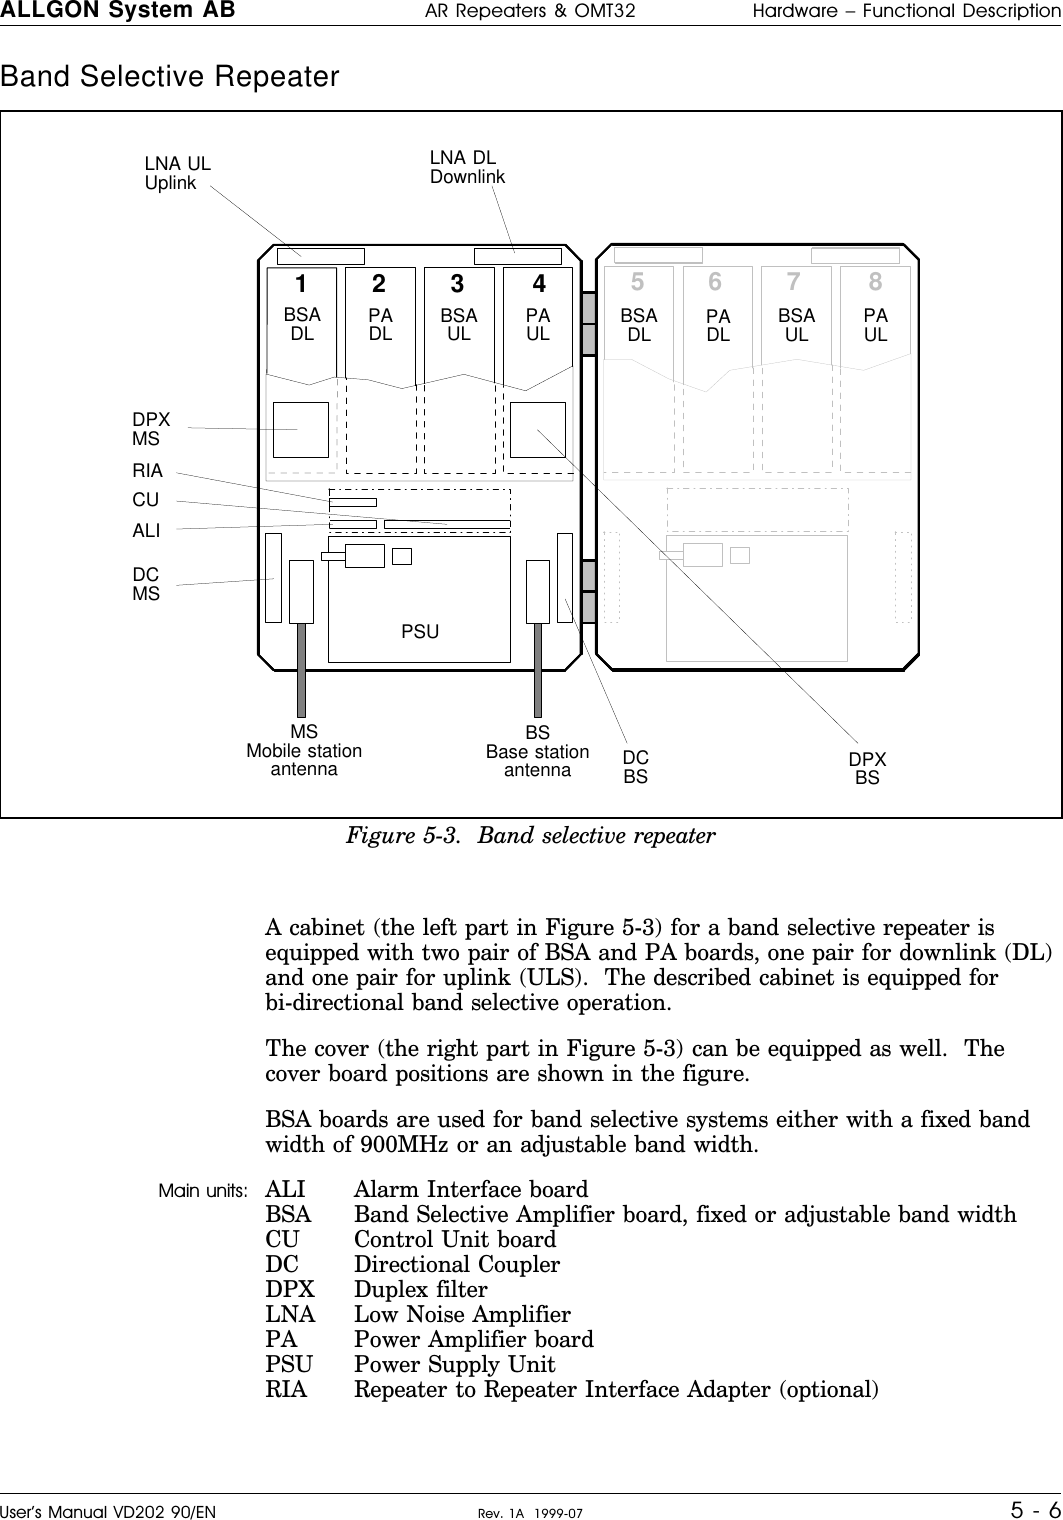 Band Selective Repeater         A cabinet (the left part in Figure 5-3) for a band selective repeater isequipped with two pair of BSA and PA boards, one pair for downlink (DL)and one pair for uplink (ULS).  The described cabinet is equipped forbi-directional band selective operation.The cover (the right part in Figure 5-3) can be equipped as well.  Thecover board positions are shown in the figure.BSA boards are used for band selective systems either with a fixed bandwidth of 900MHz or an adjustable band width.Main units: ALI Alarm Interface boardBSA Band Selective Amplifier board, fixed or adjustable band widthCU Control Unit boardDC Directional CouplerDPX Duplex filterLNA Low Noise AmplifierPA Power Amplifier boardPSU Power Supply UnitRIA Repeater to Repeater Interface Adapter (optional)123 4 567 8BSADLMSMobile stationantennaBSBase stationantennaPADL BSAUL PAULLNA DLDownlinkLNA ULUplinkDPXMSDCMSCUALIDCBS DPXBSPSURIABSADL PADL BSAUL PAULFigure 5-3.  Band selective repeaterALLGON System AB AR Repeaters &amp; OMT32 Hardware – Functional DescriptionUser’s Manual VD202 90/EN Rev. 1A  1999-07 5 - 6